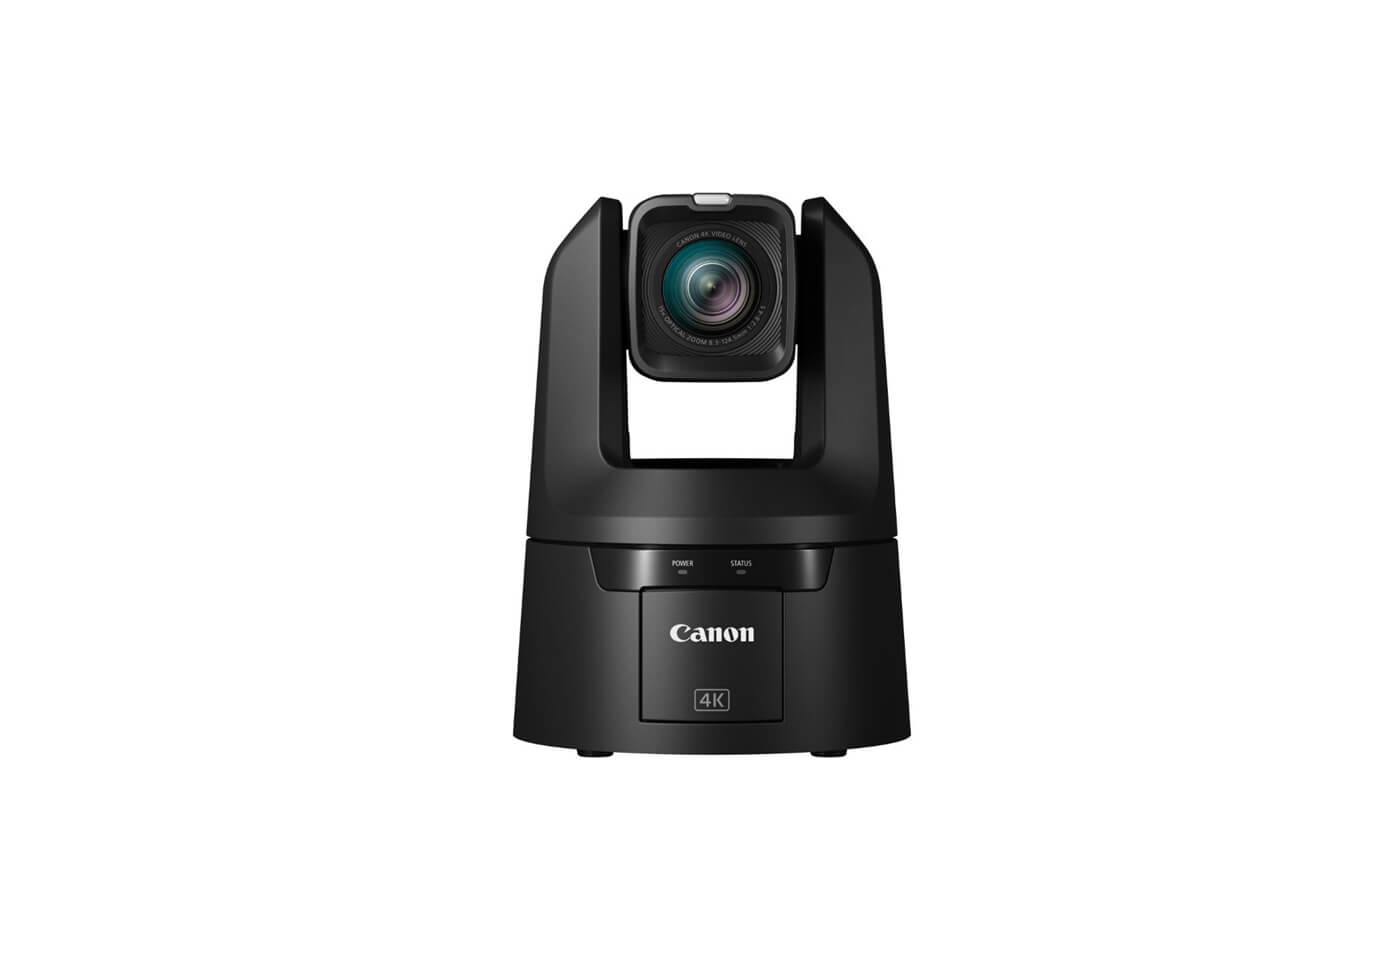 Product image of CR-N500 remote camera